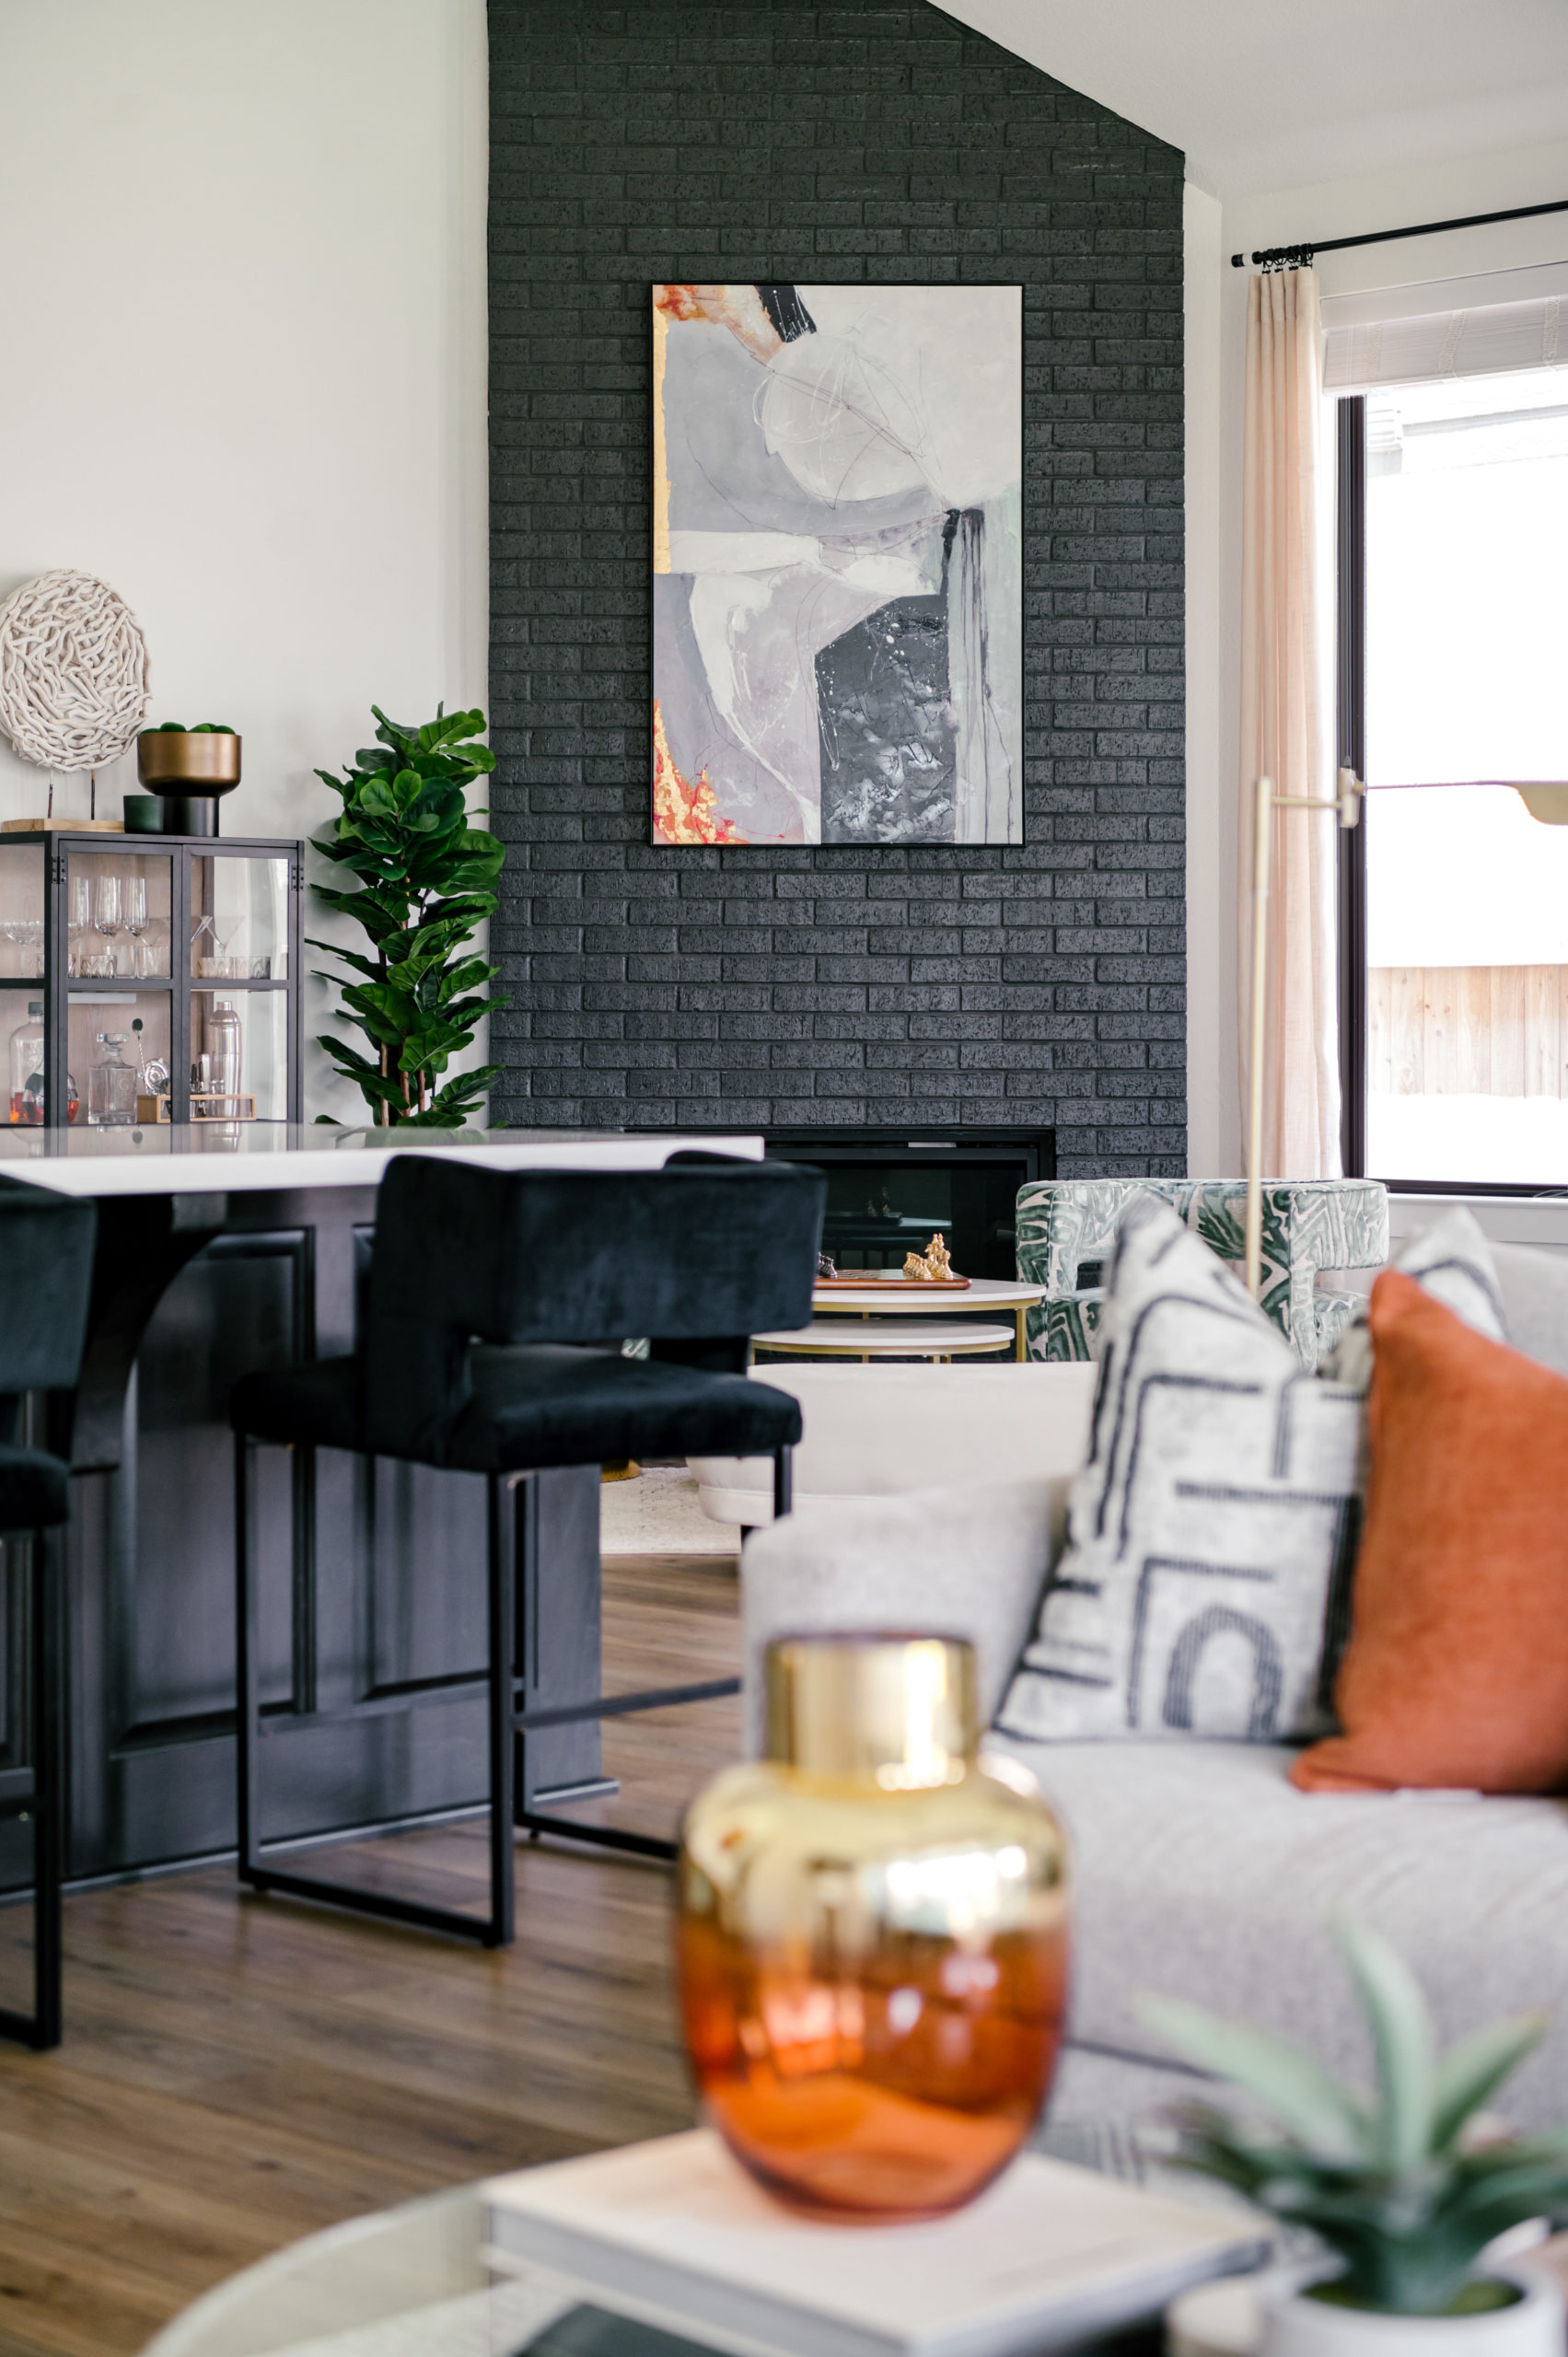 Living room and kitchen interior design, black bar stool sitting on the edge of the kitchen island, wall art on black brick wall hanging above fireplace